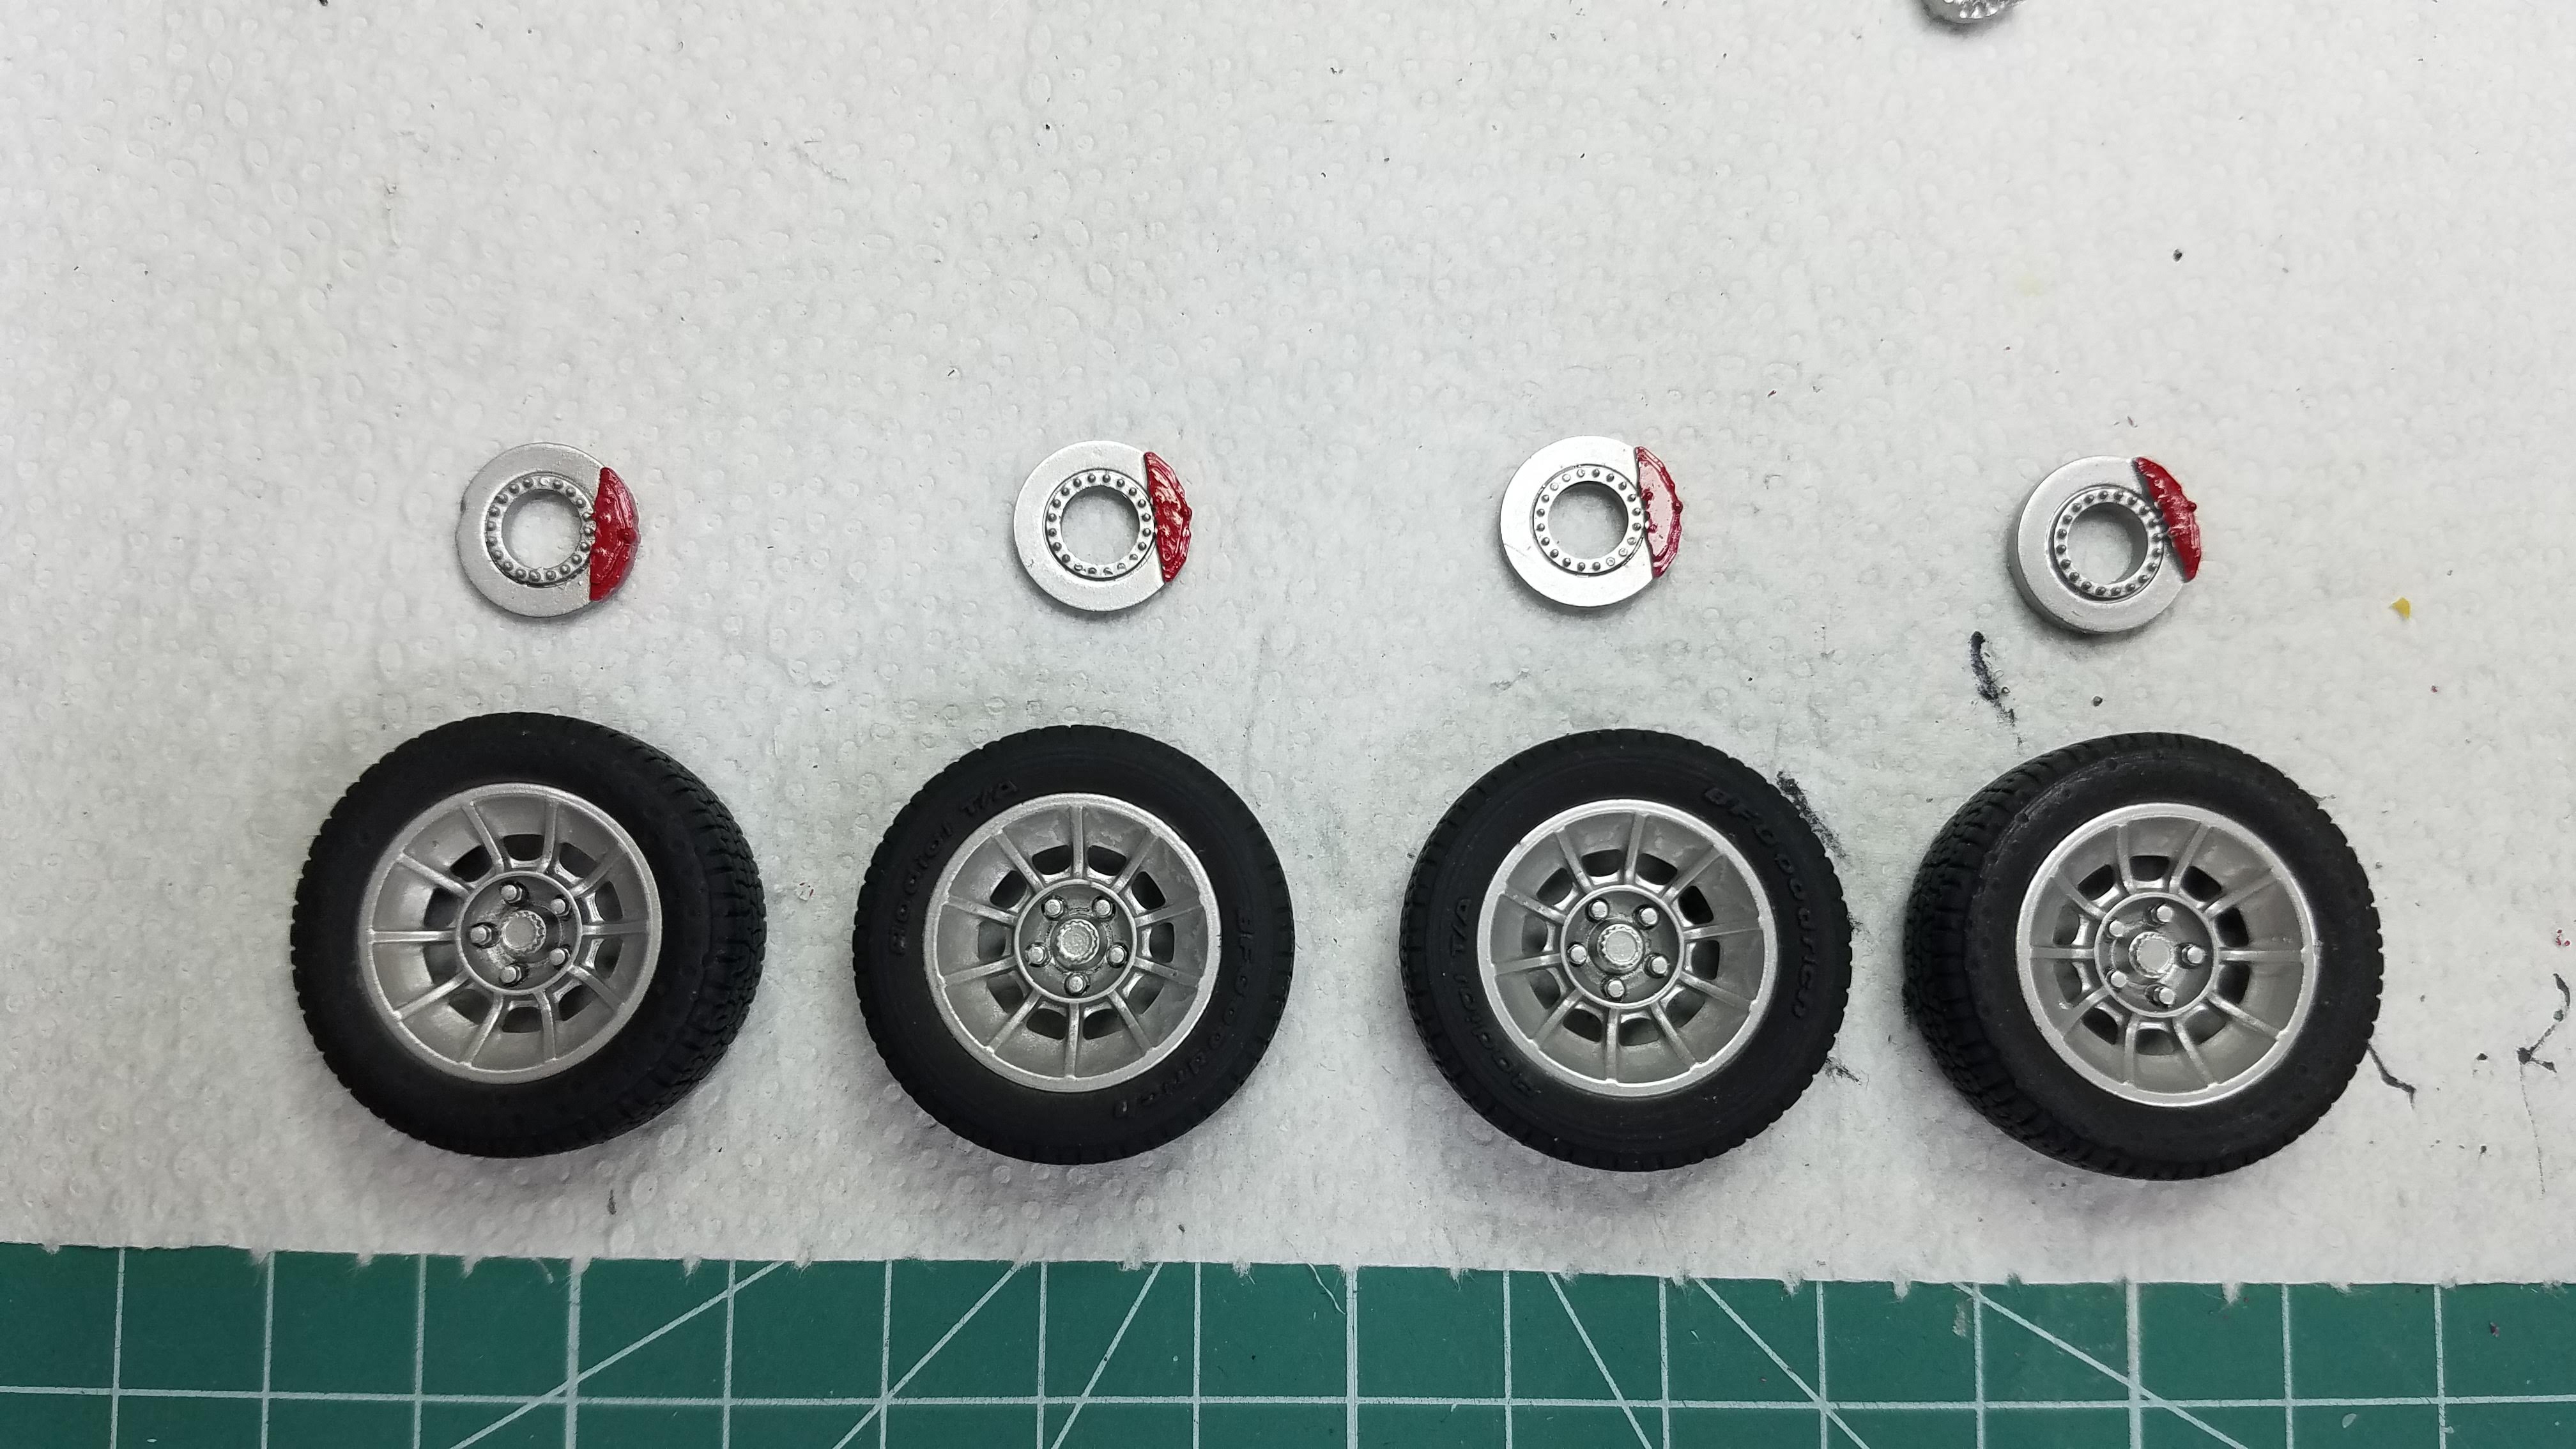 Tires and wheels assembled